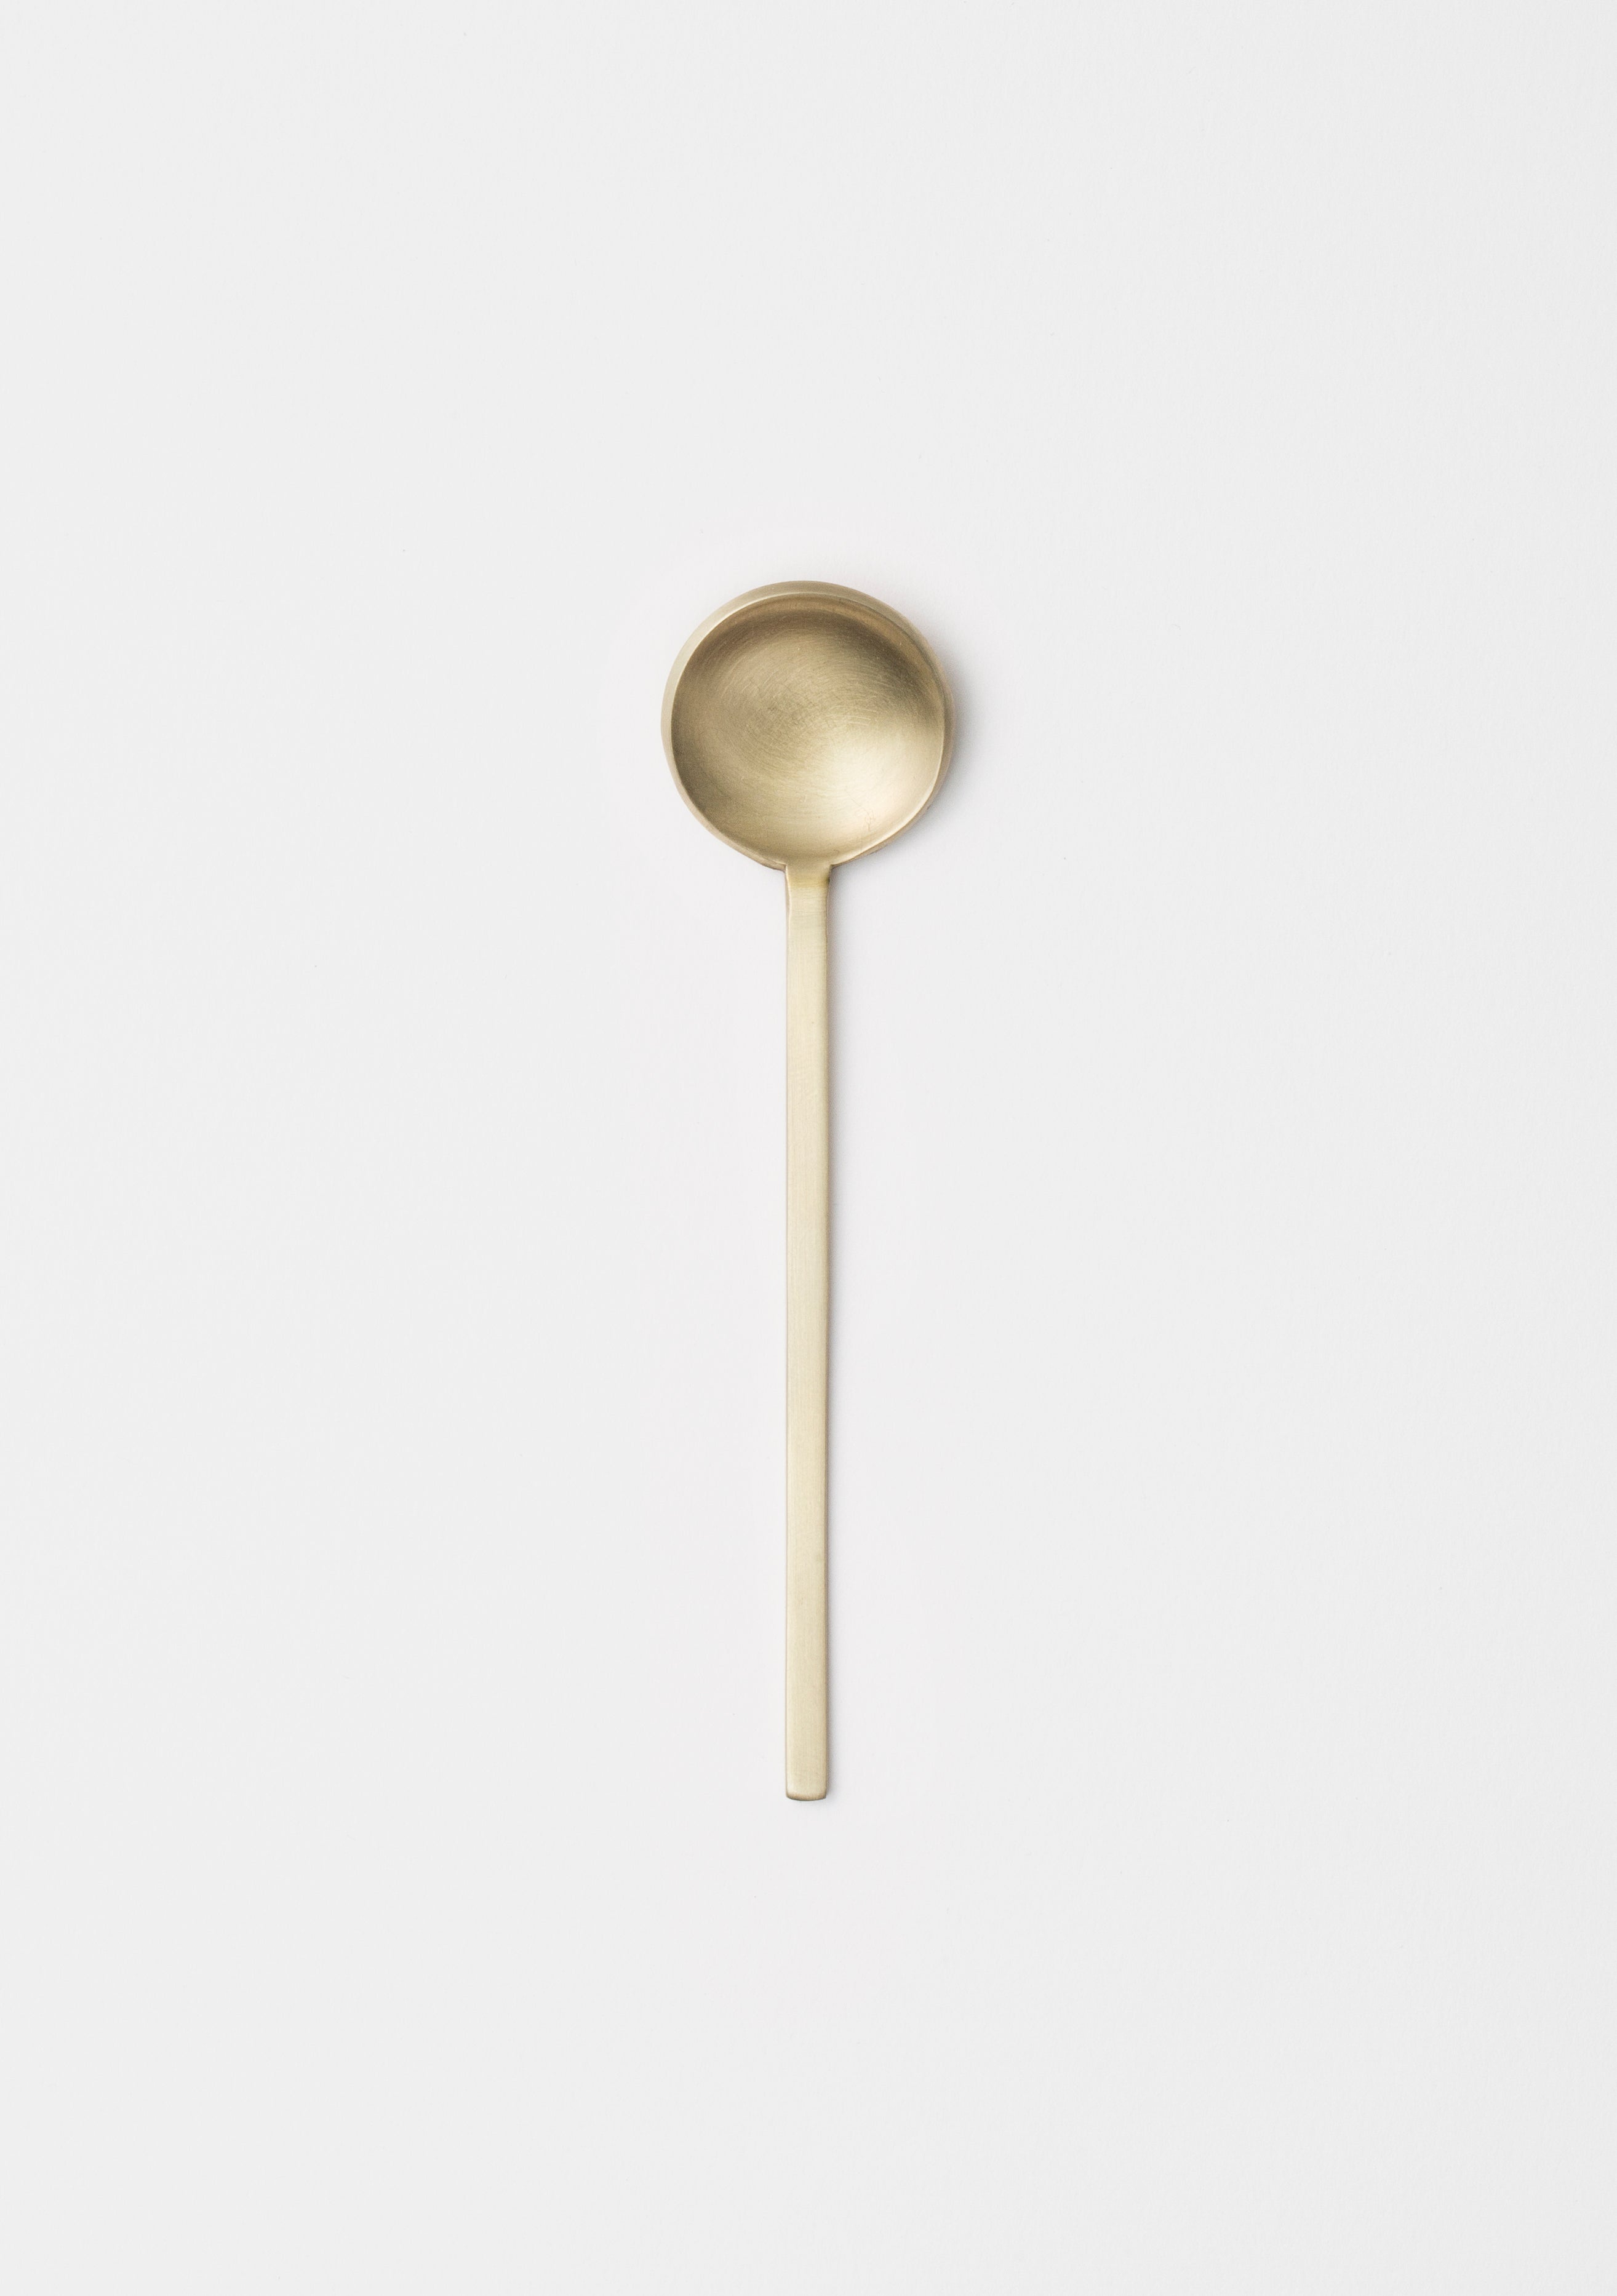 Fein Small Spoon. A small, artfully crafted spoon perfect for mixing coffee, measuring out salt, pepper or spices or scooping the flesh from smaller fruits. 